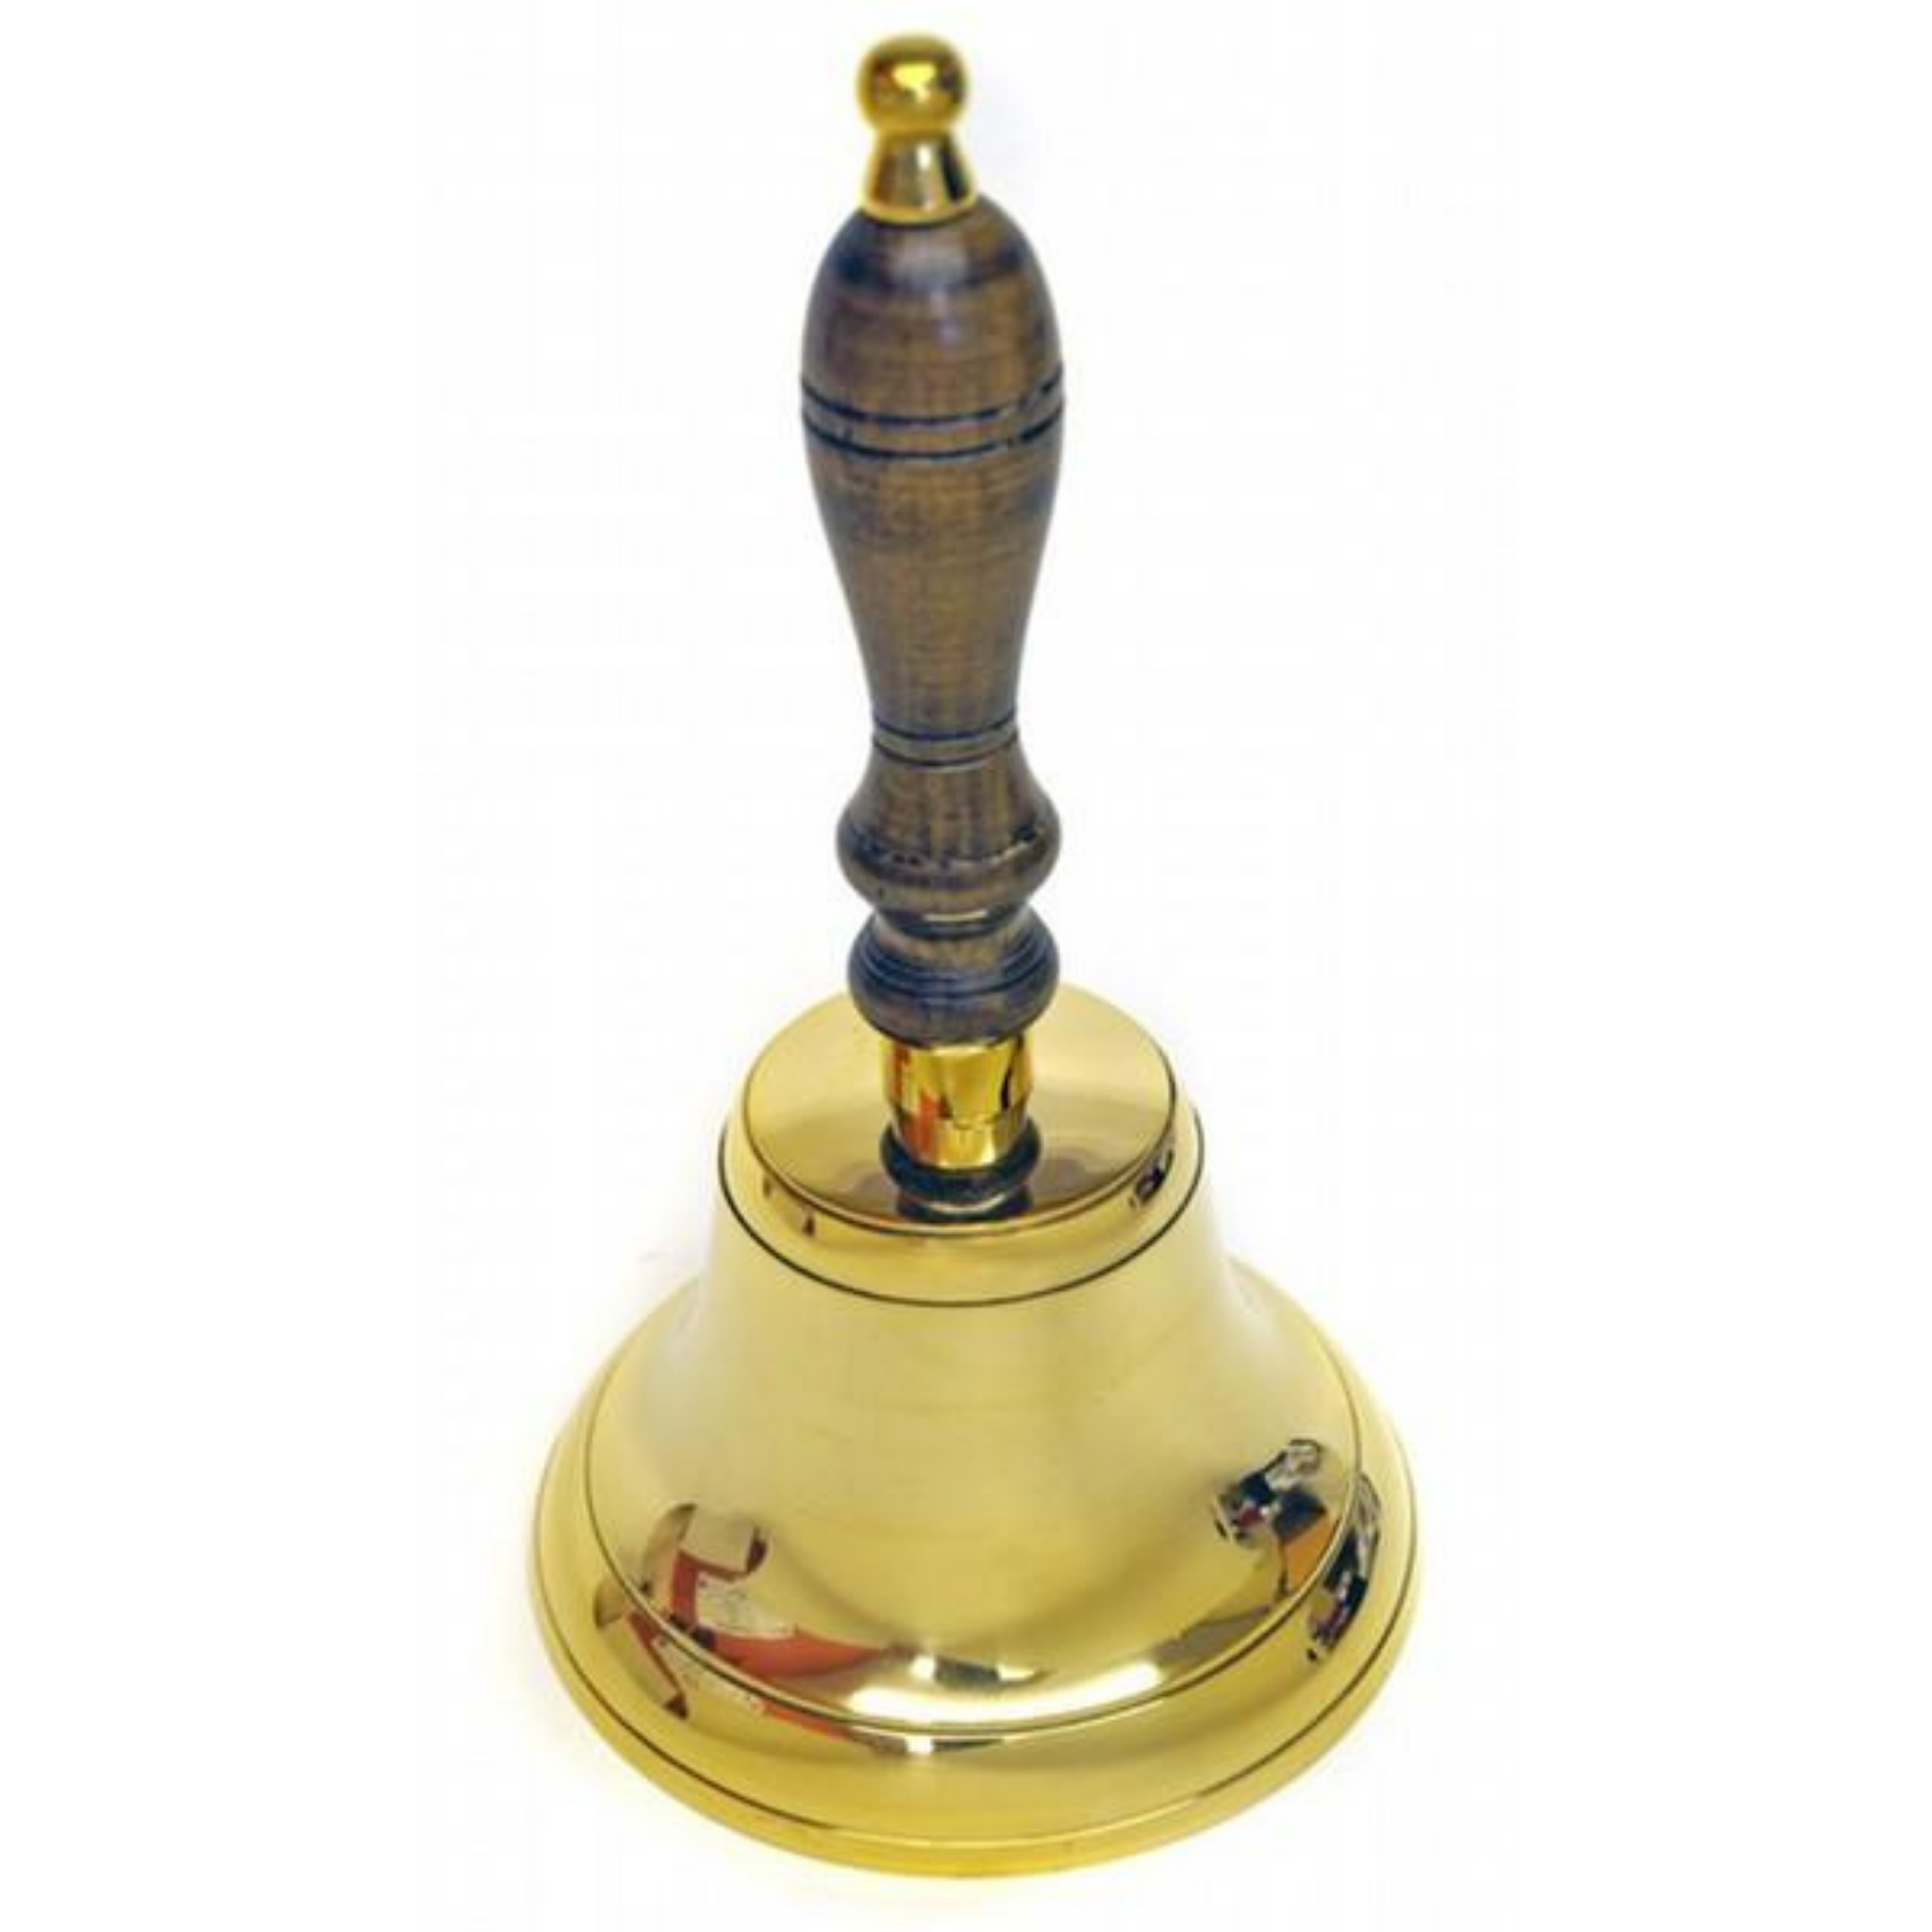 Brass hand bell with a wooden handle | Athletics lap bell or school bell